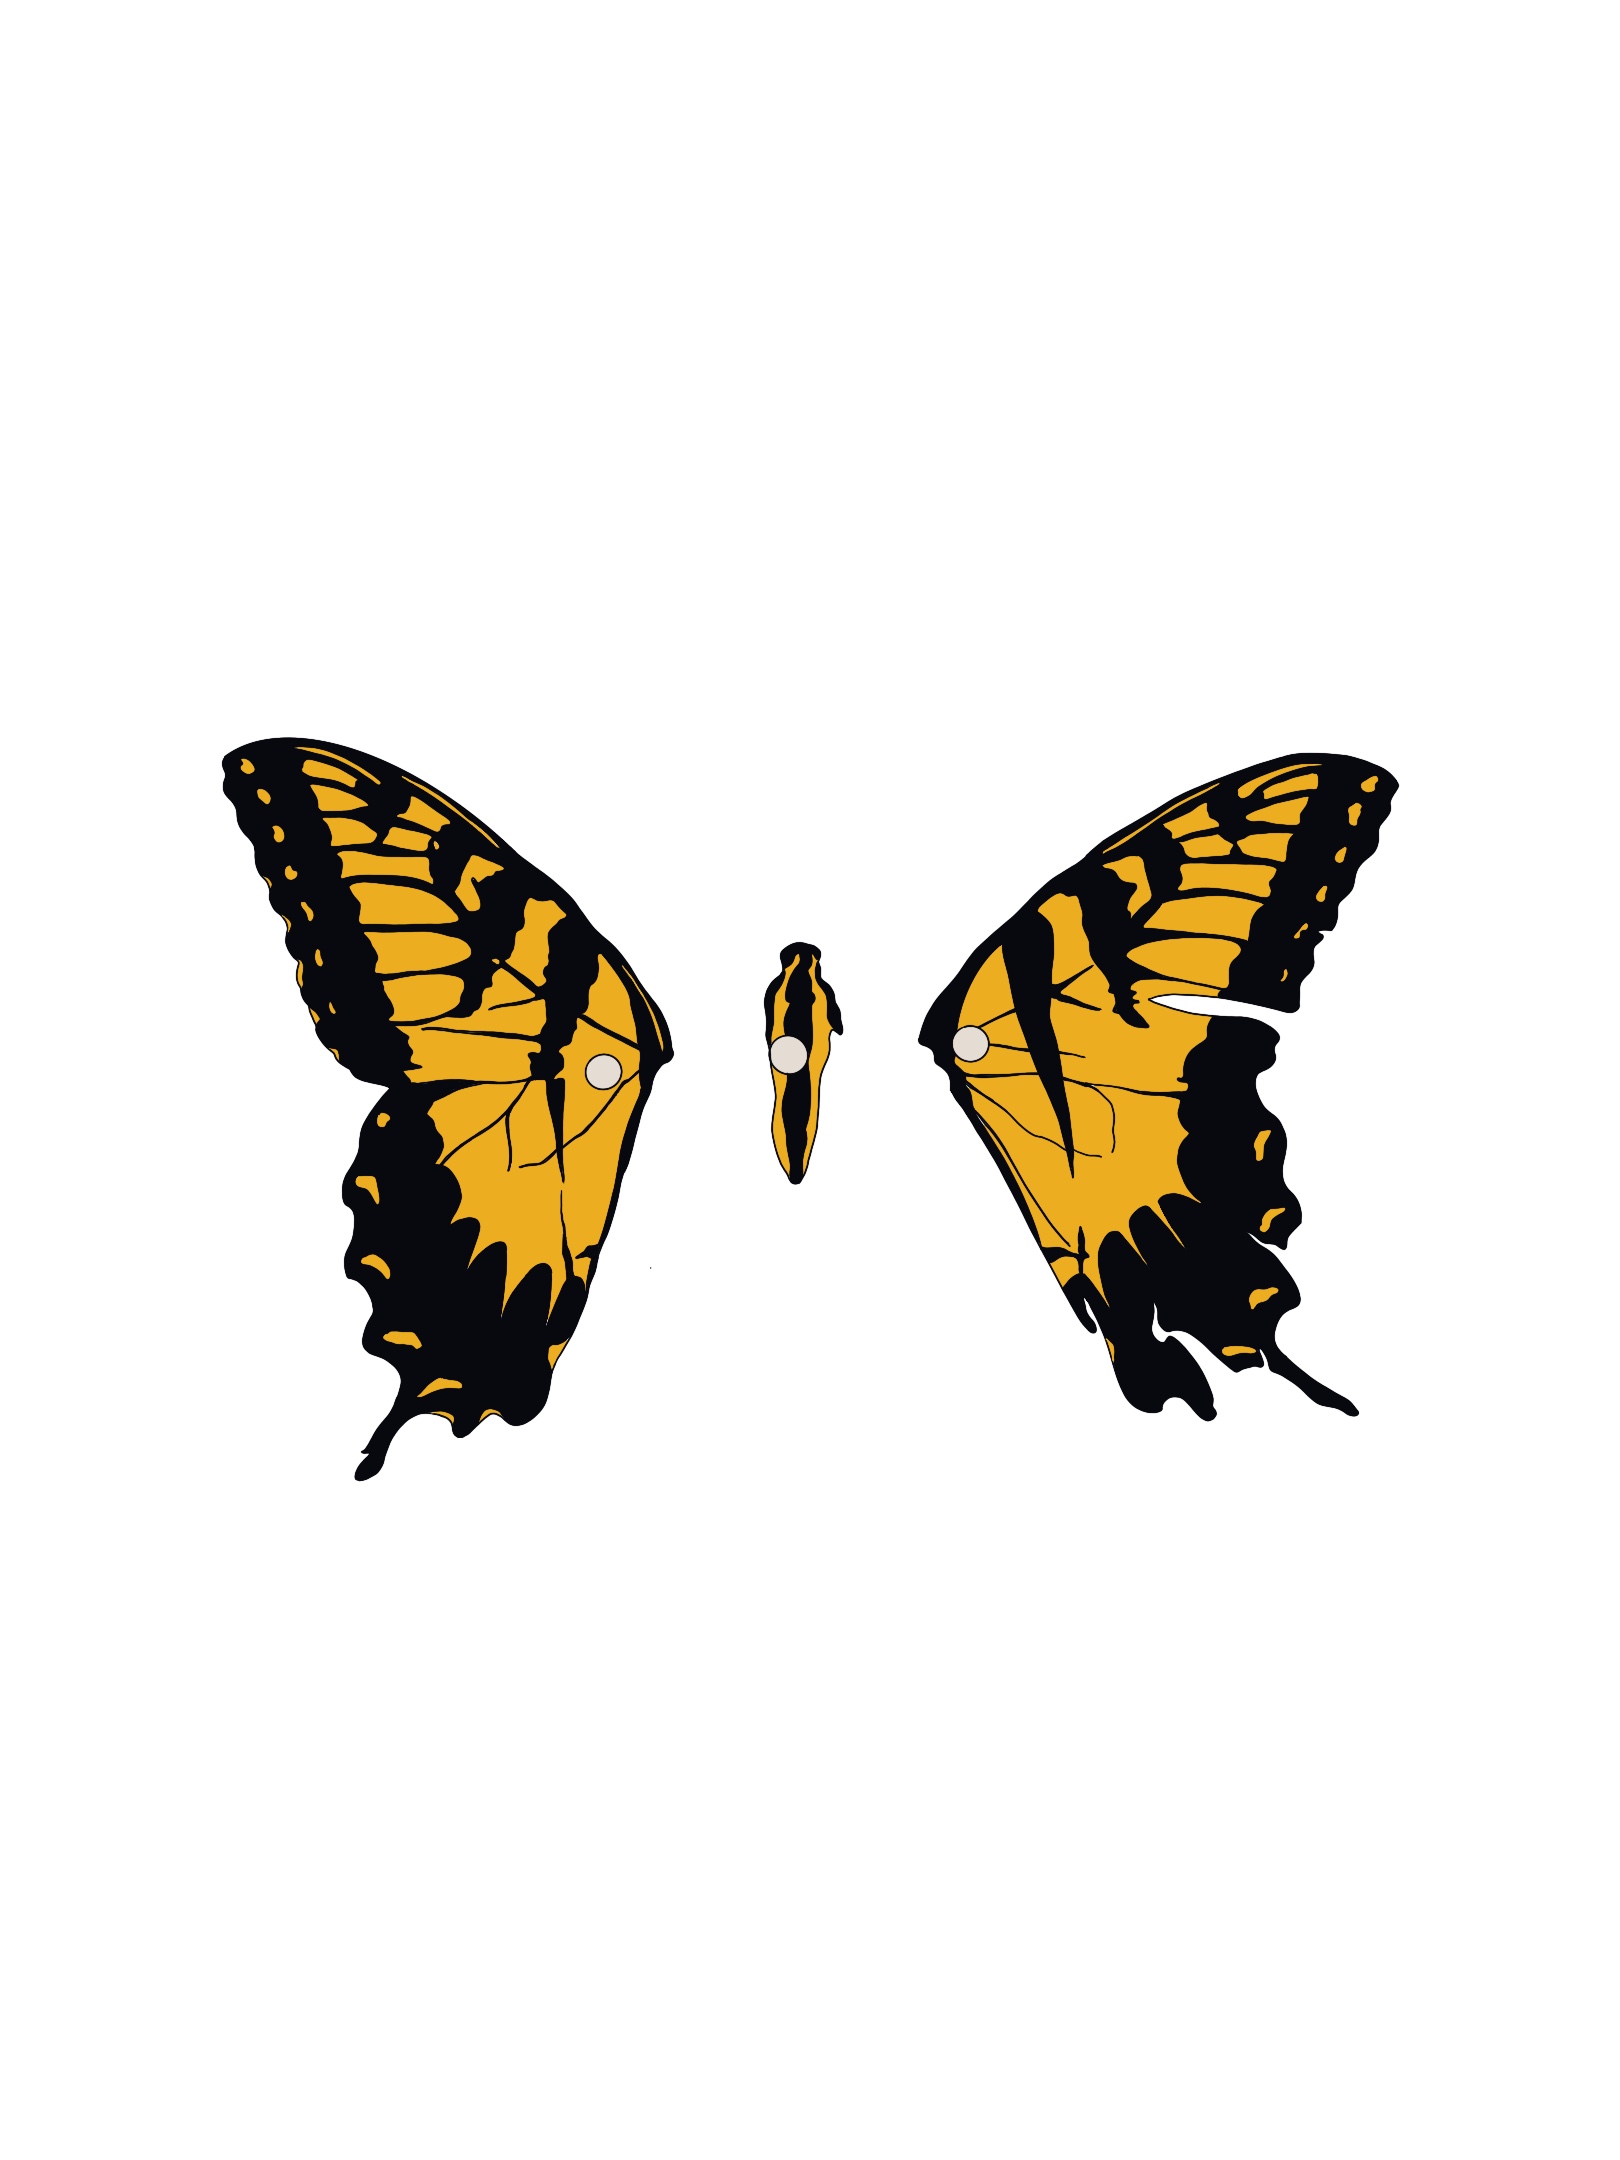 the monarch butterfly paramore album cover gif